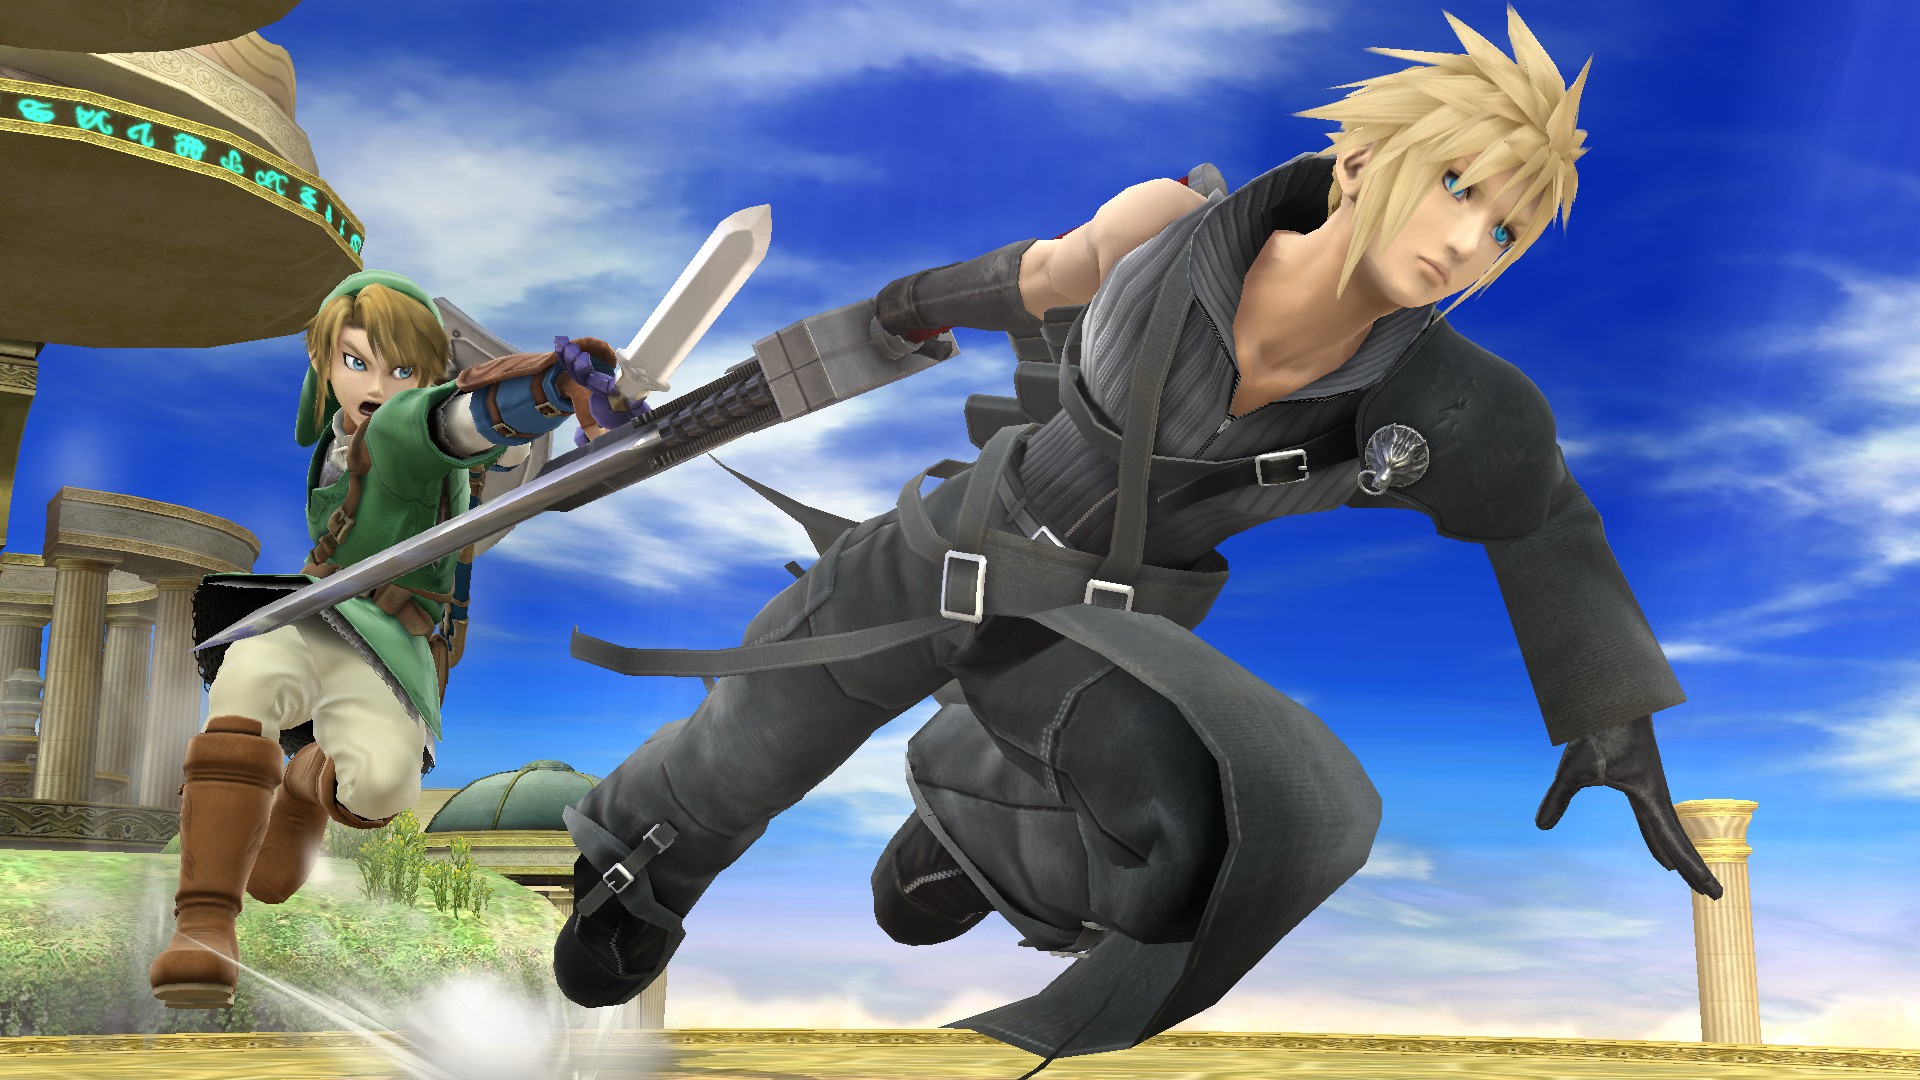 Bayonetta and Corrin now available for Super Smash Bros. 3DS and Wii U